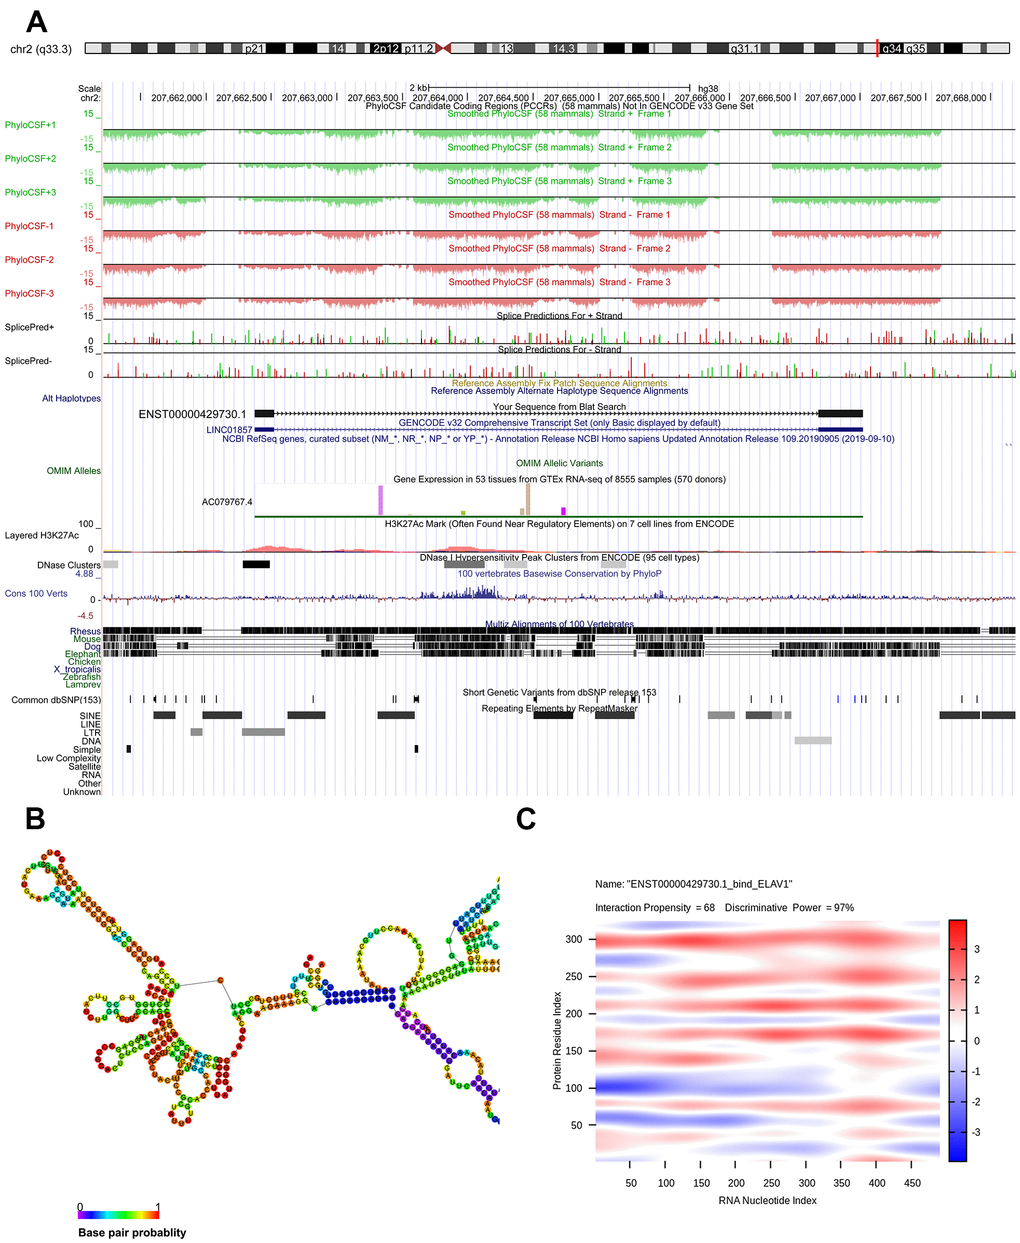 Bioinformatics analysis of ENST00000429730.1. (A) chromosome location of ENST00000429730.1; (B) optimal secondary structure for ENST00000429730.1; (C) interaction between ENST00000429730.1 and ELAV1.